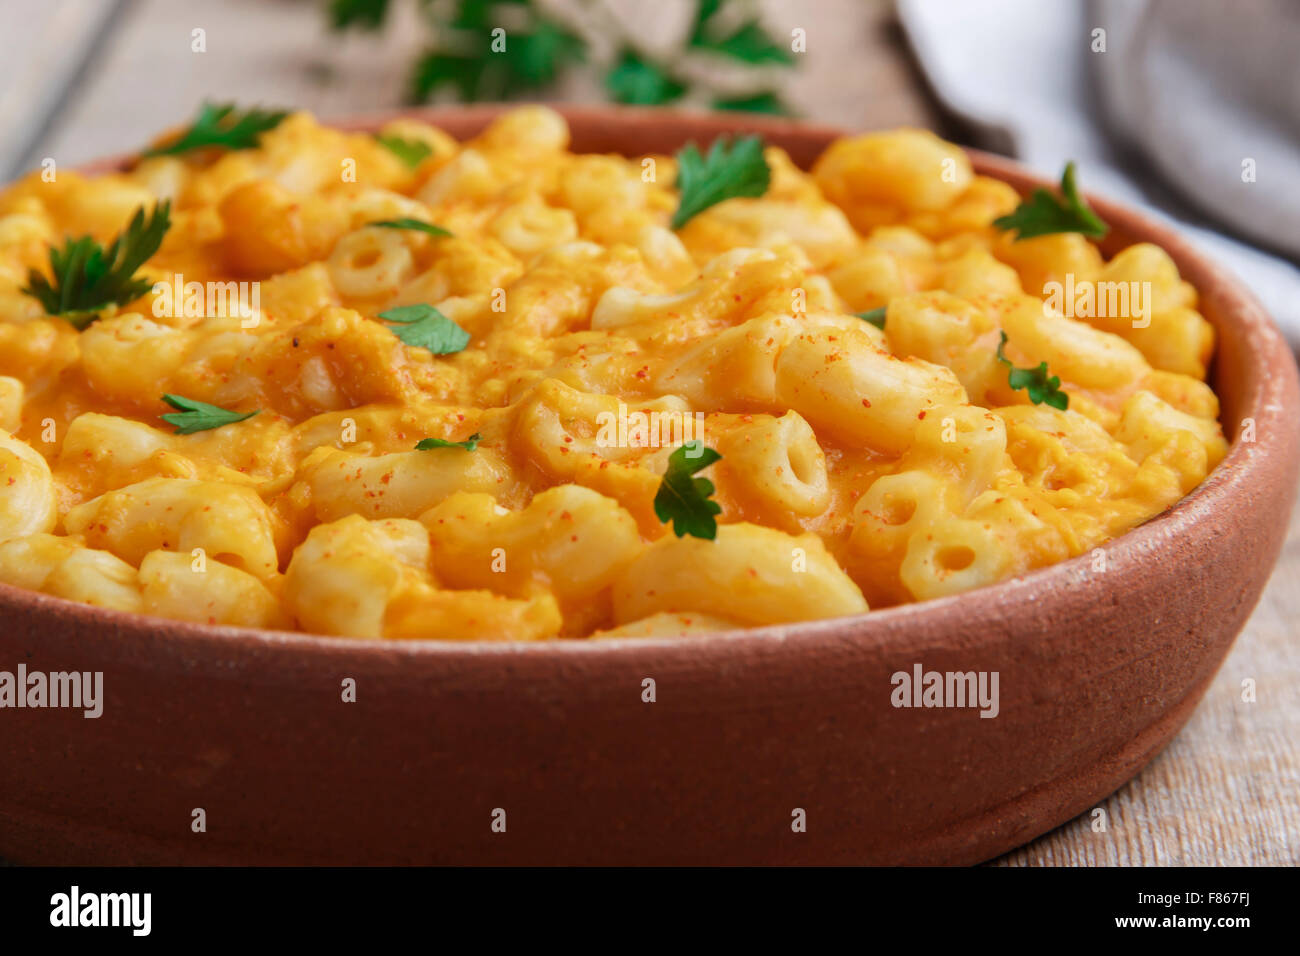 Pasta with pumpkin and cheese creamy Stock Photo